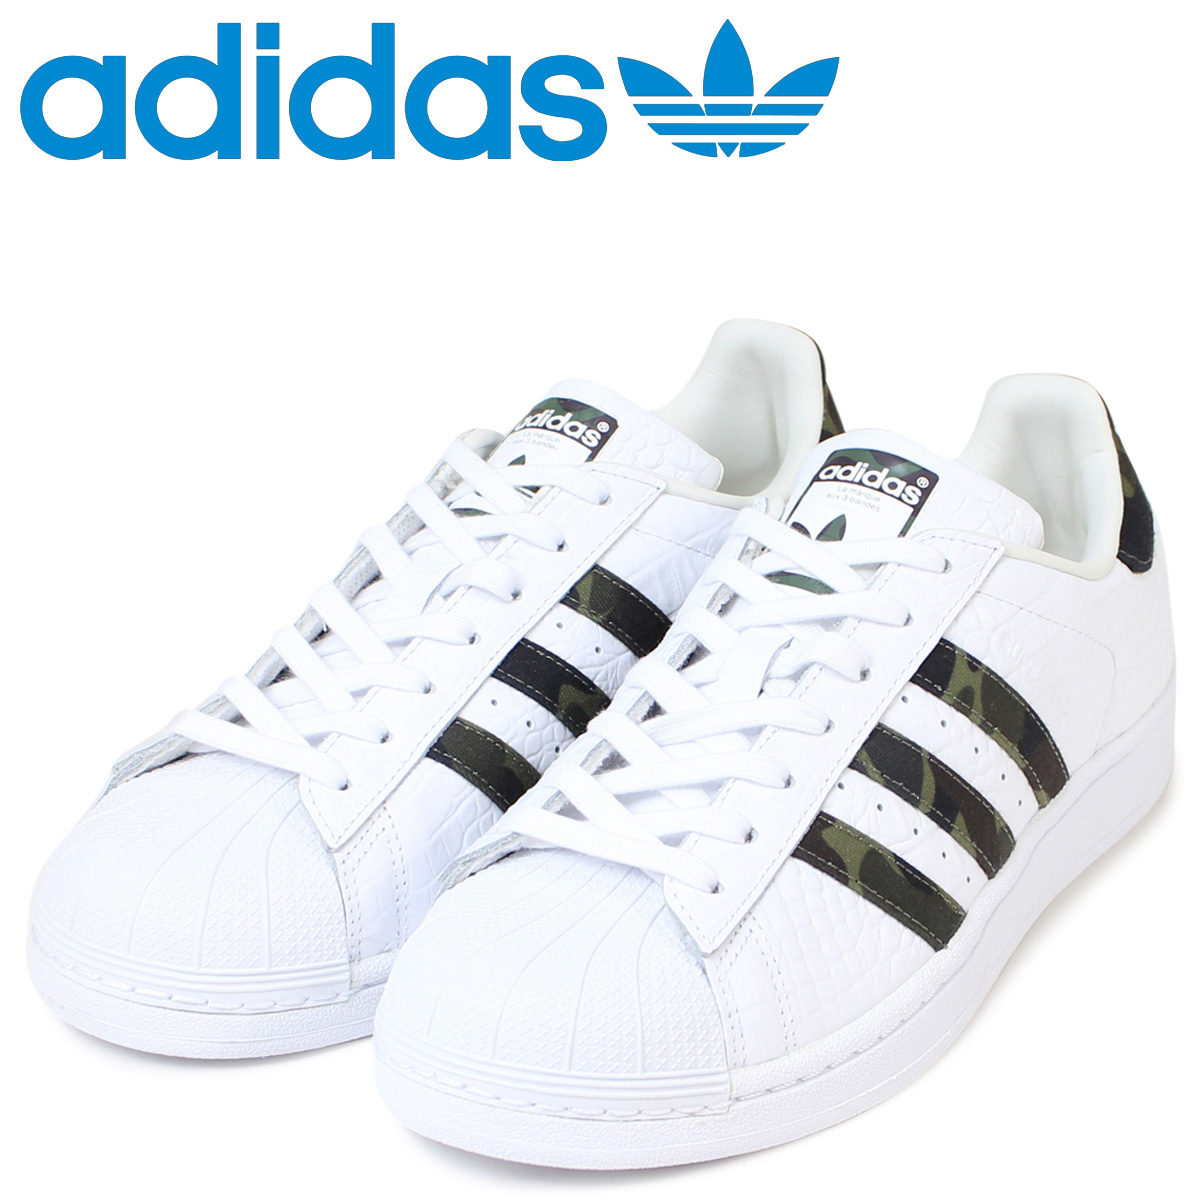 adidas sneakers price in qatar